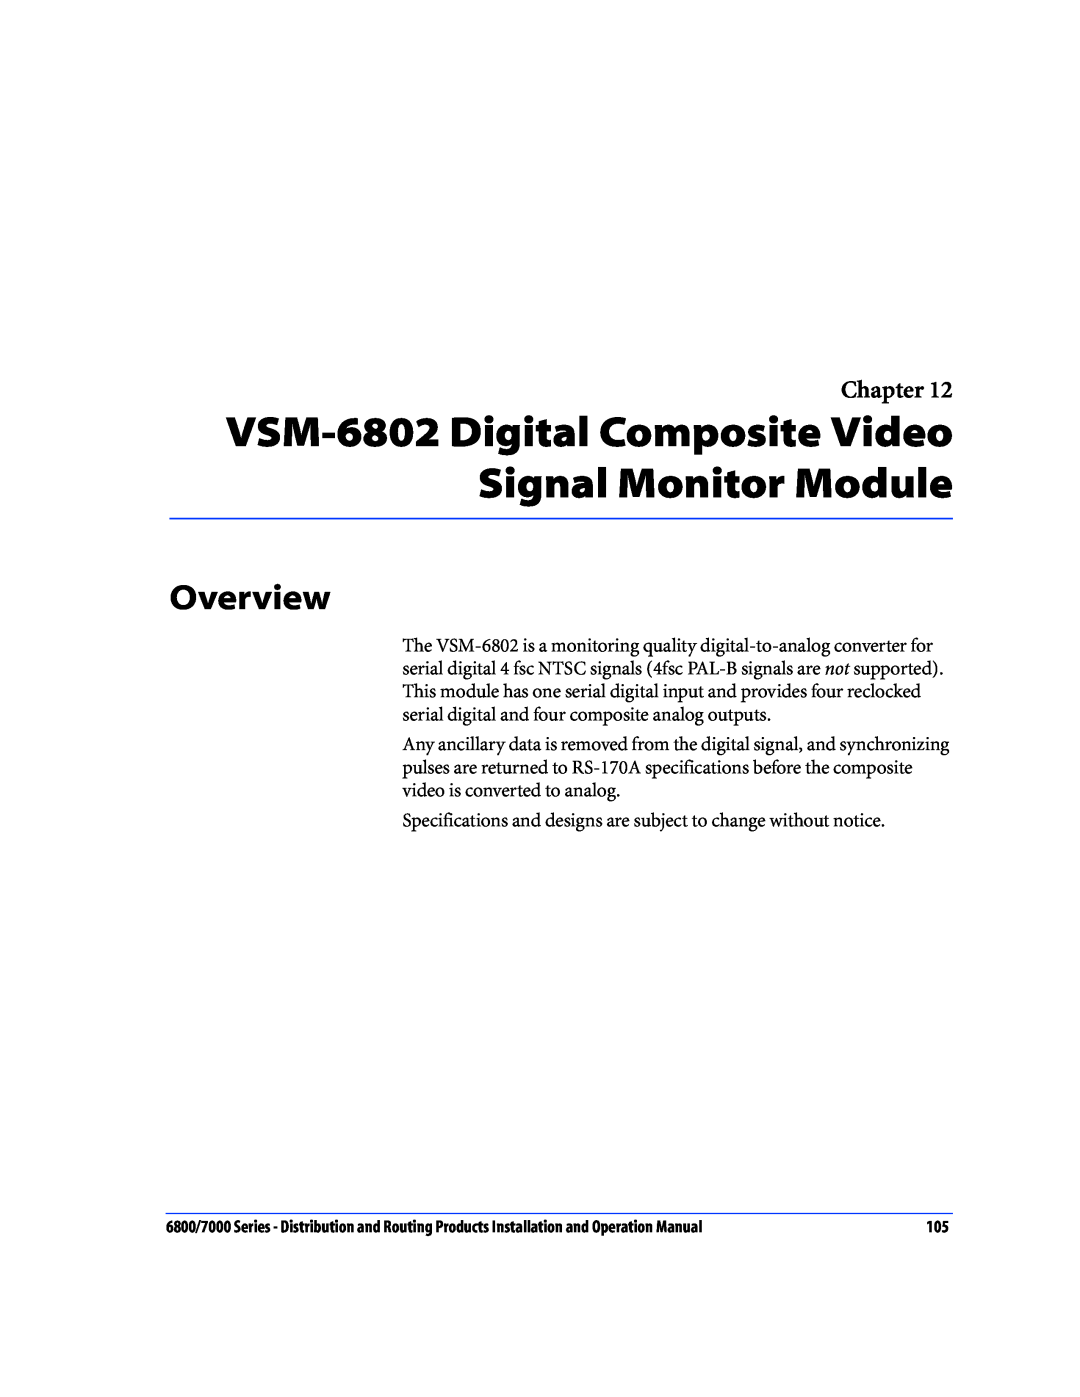 Nokia 6800 Series, 7000 Series operation manual VSM-6802 Digital Composite Video Signal Monitor Module, Overview, Chapter 